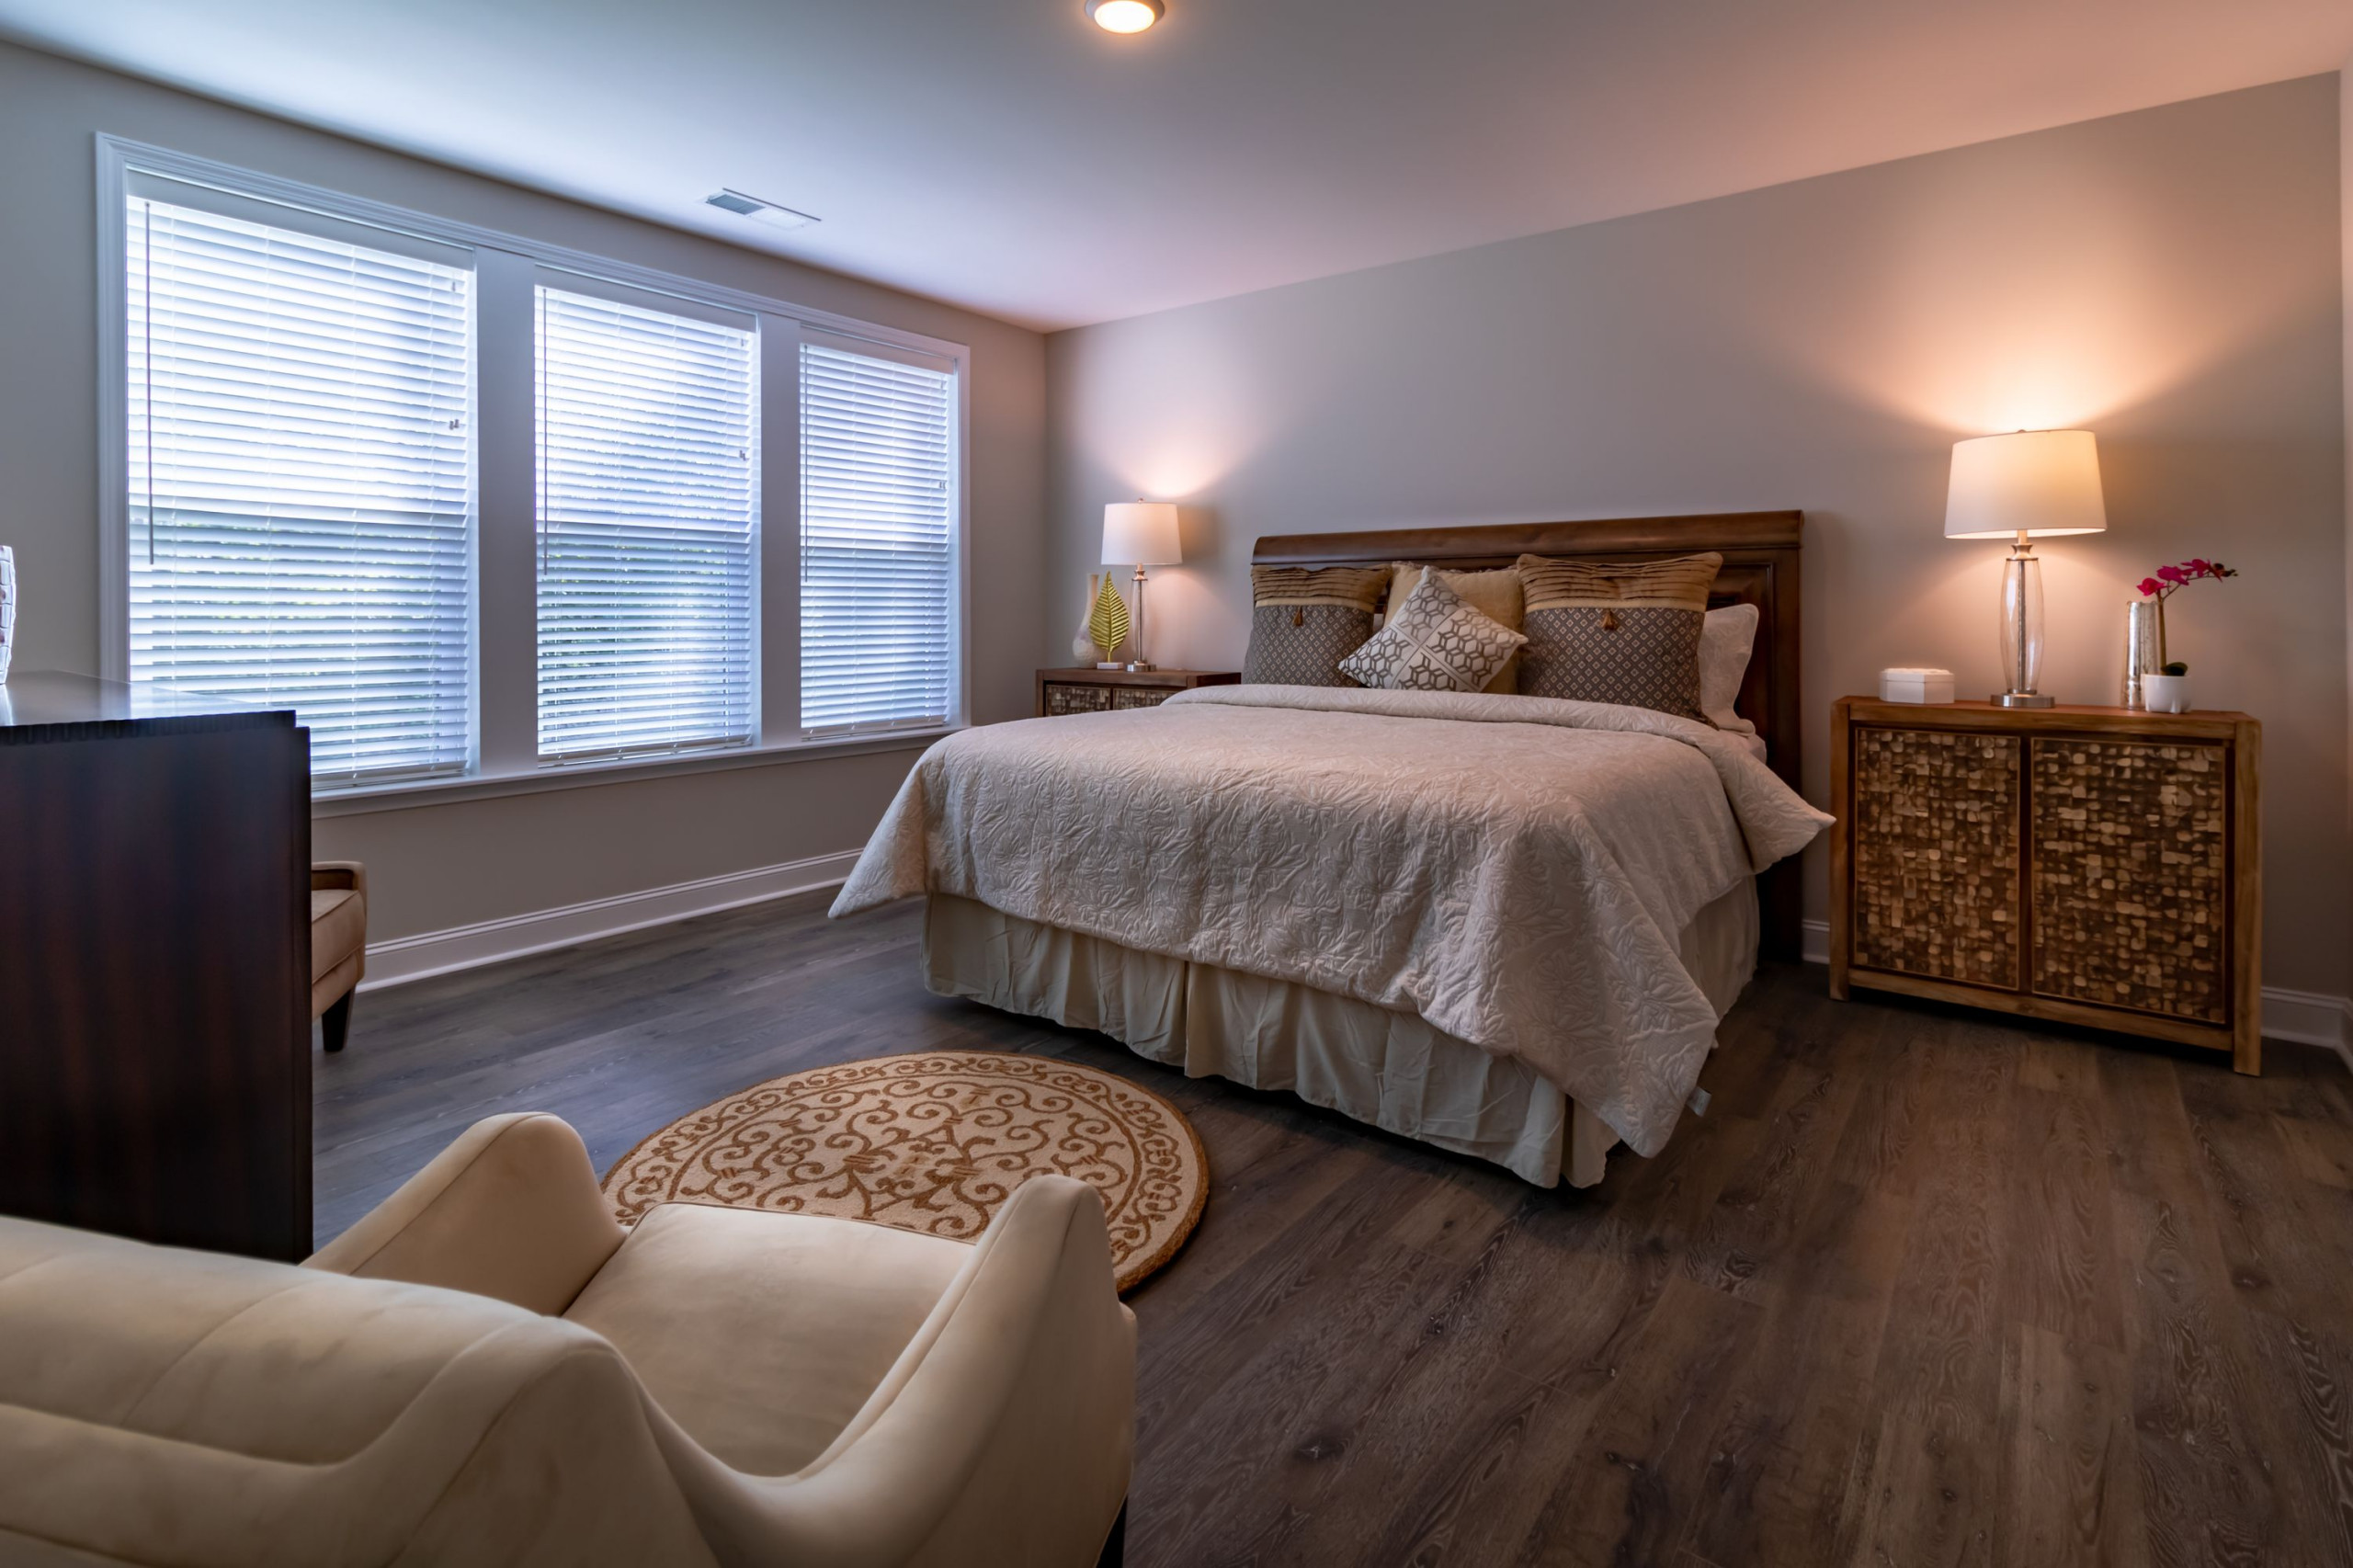 Transitional Home Transformation - Bedrooms